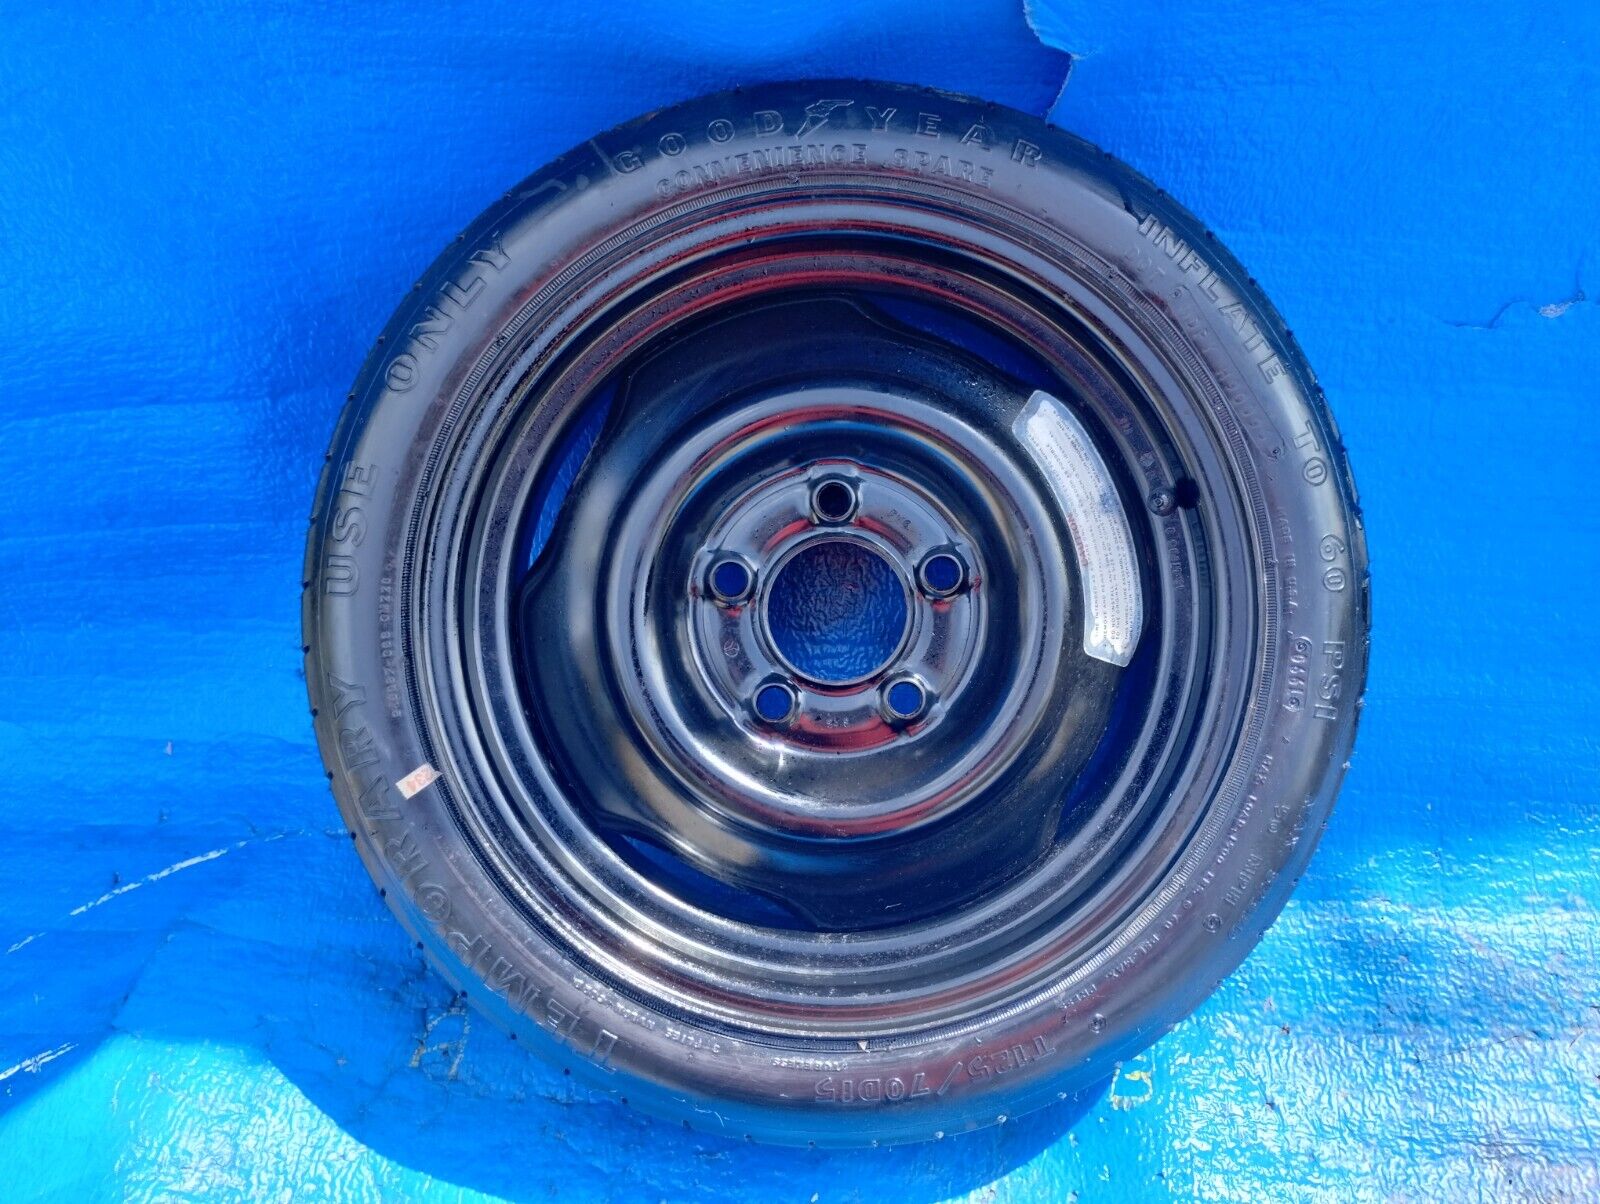 81-89 Rwd Dodge Chrysler Plymouth Mini Spare Tire With Cover M- Body 